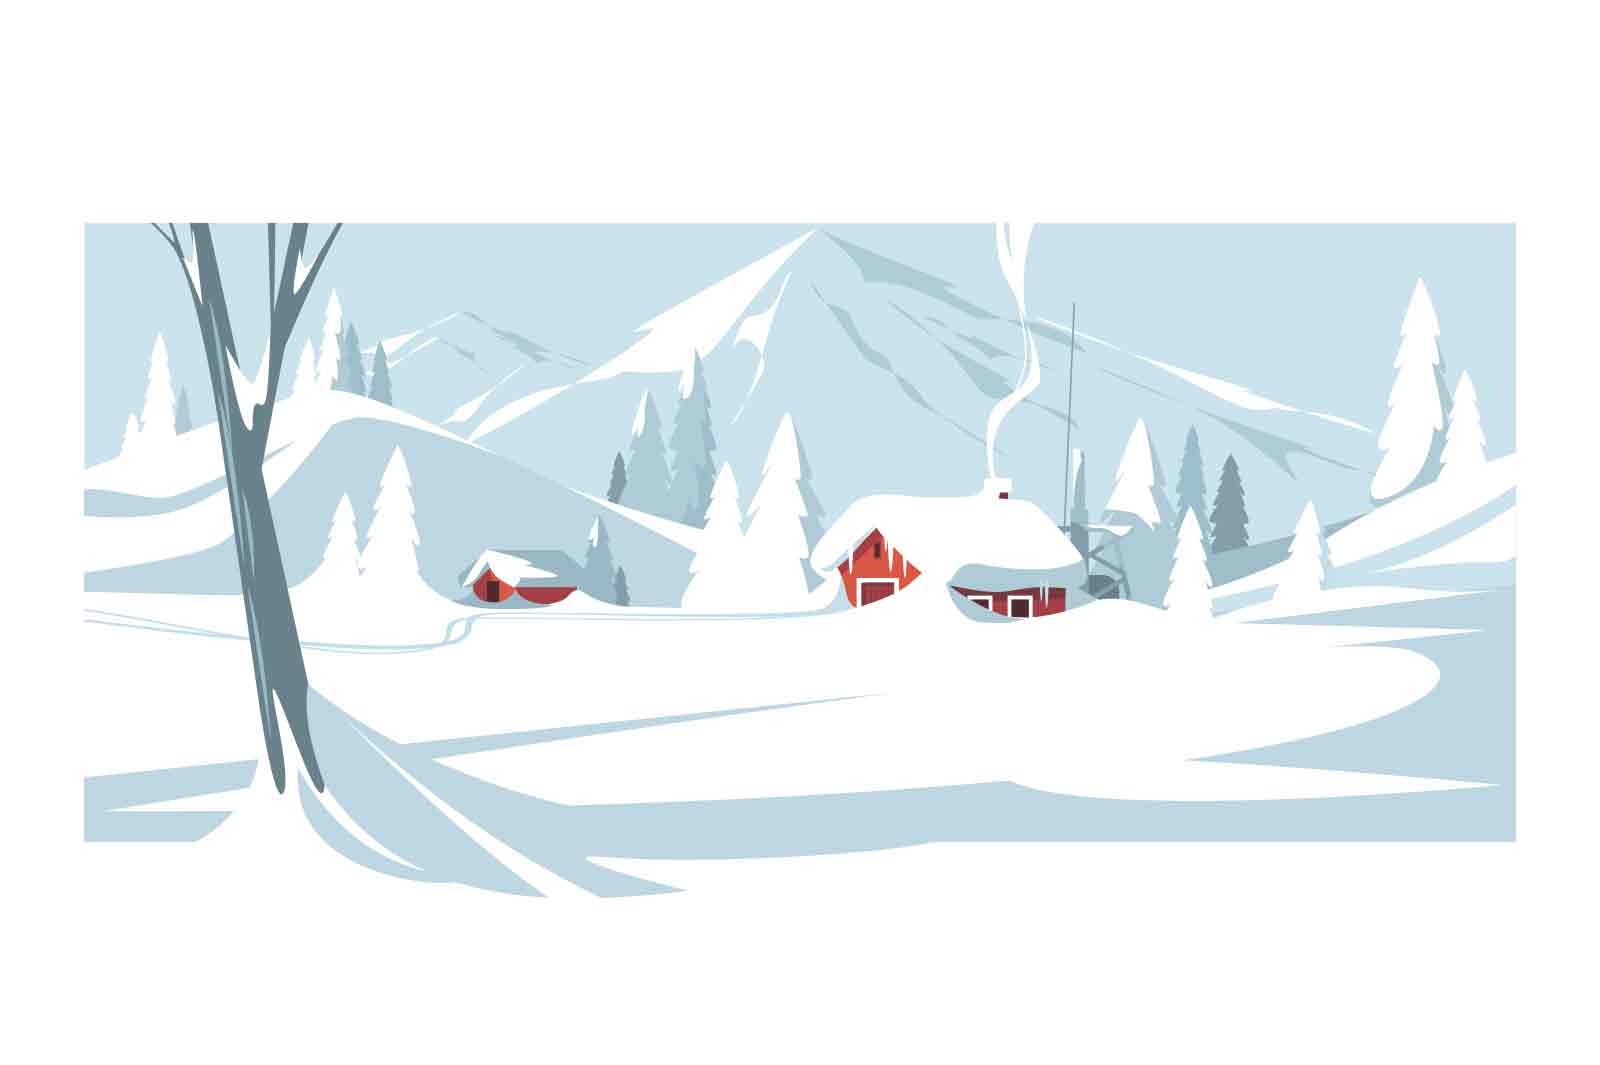 Small houses between snowy mountains, magic land view vector illustration. Tiny village in mountain flat style. Winter holiday, snow concept